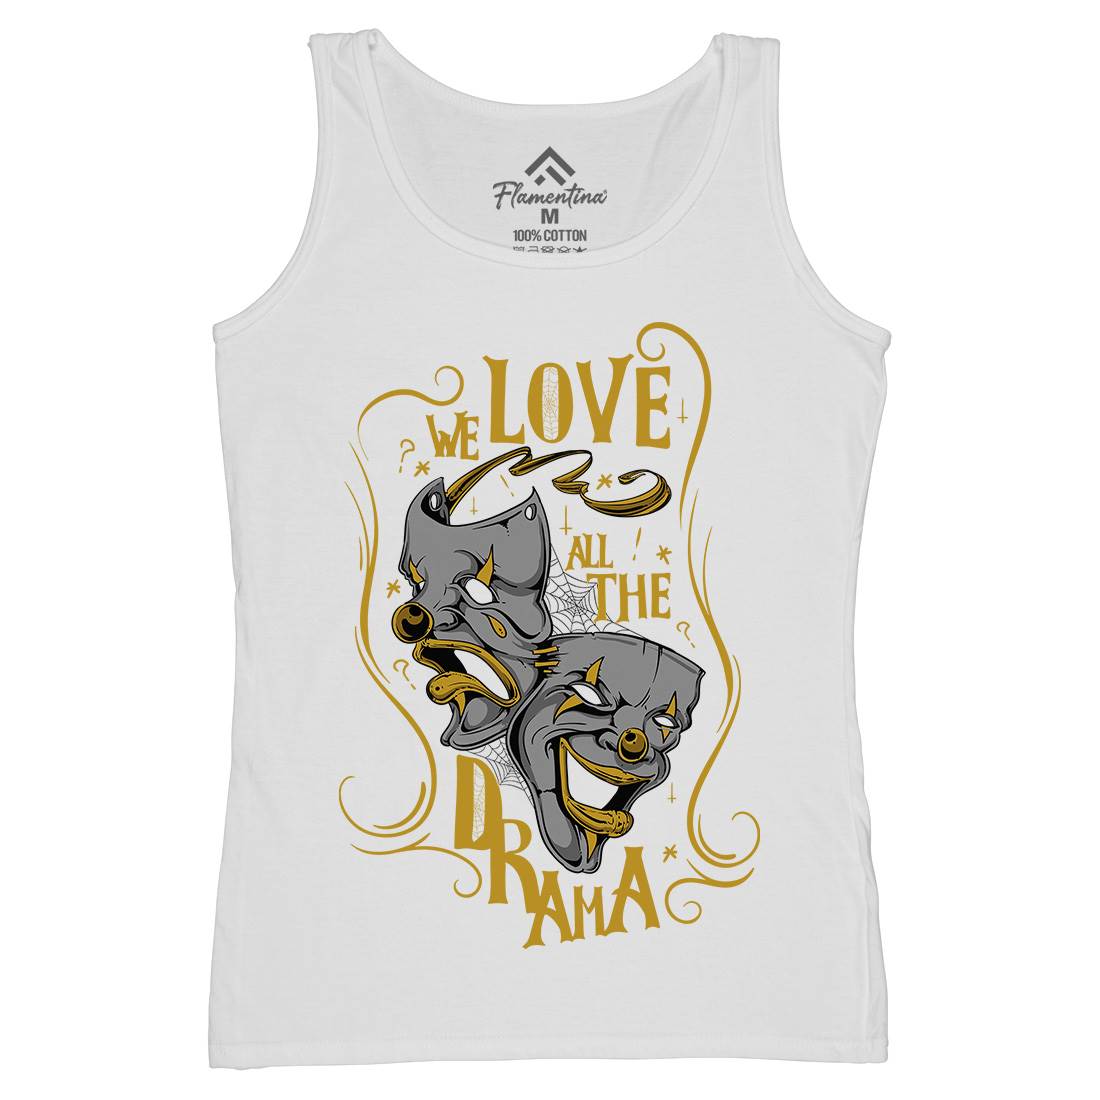 We Love All The Drama Womens Organic Tank Top Vest Funny D496